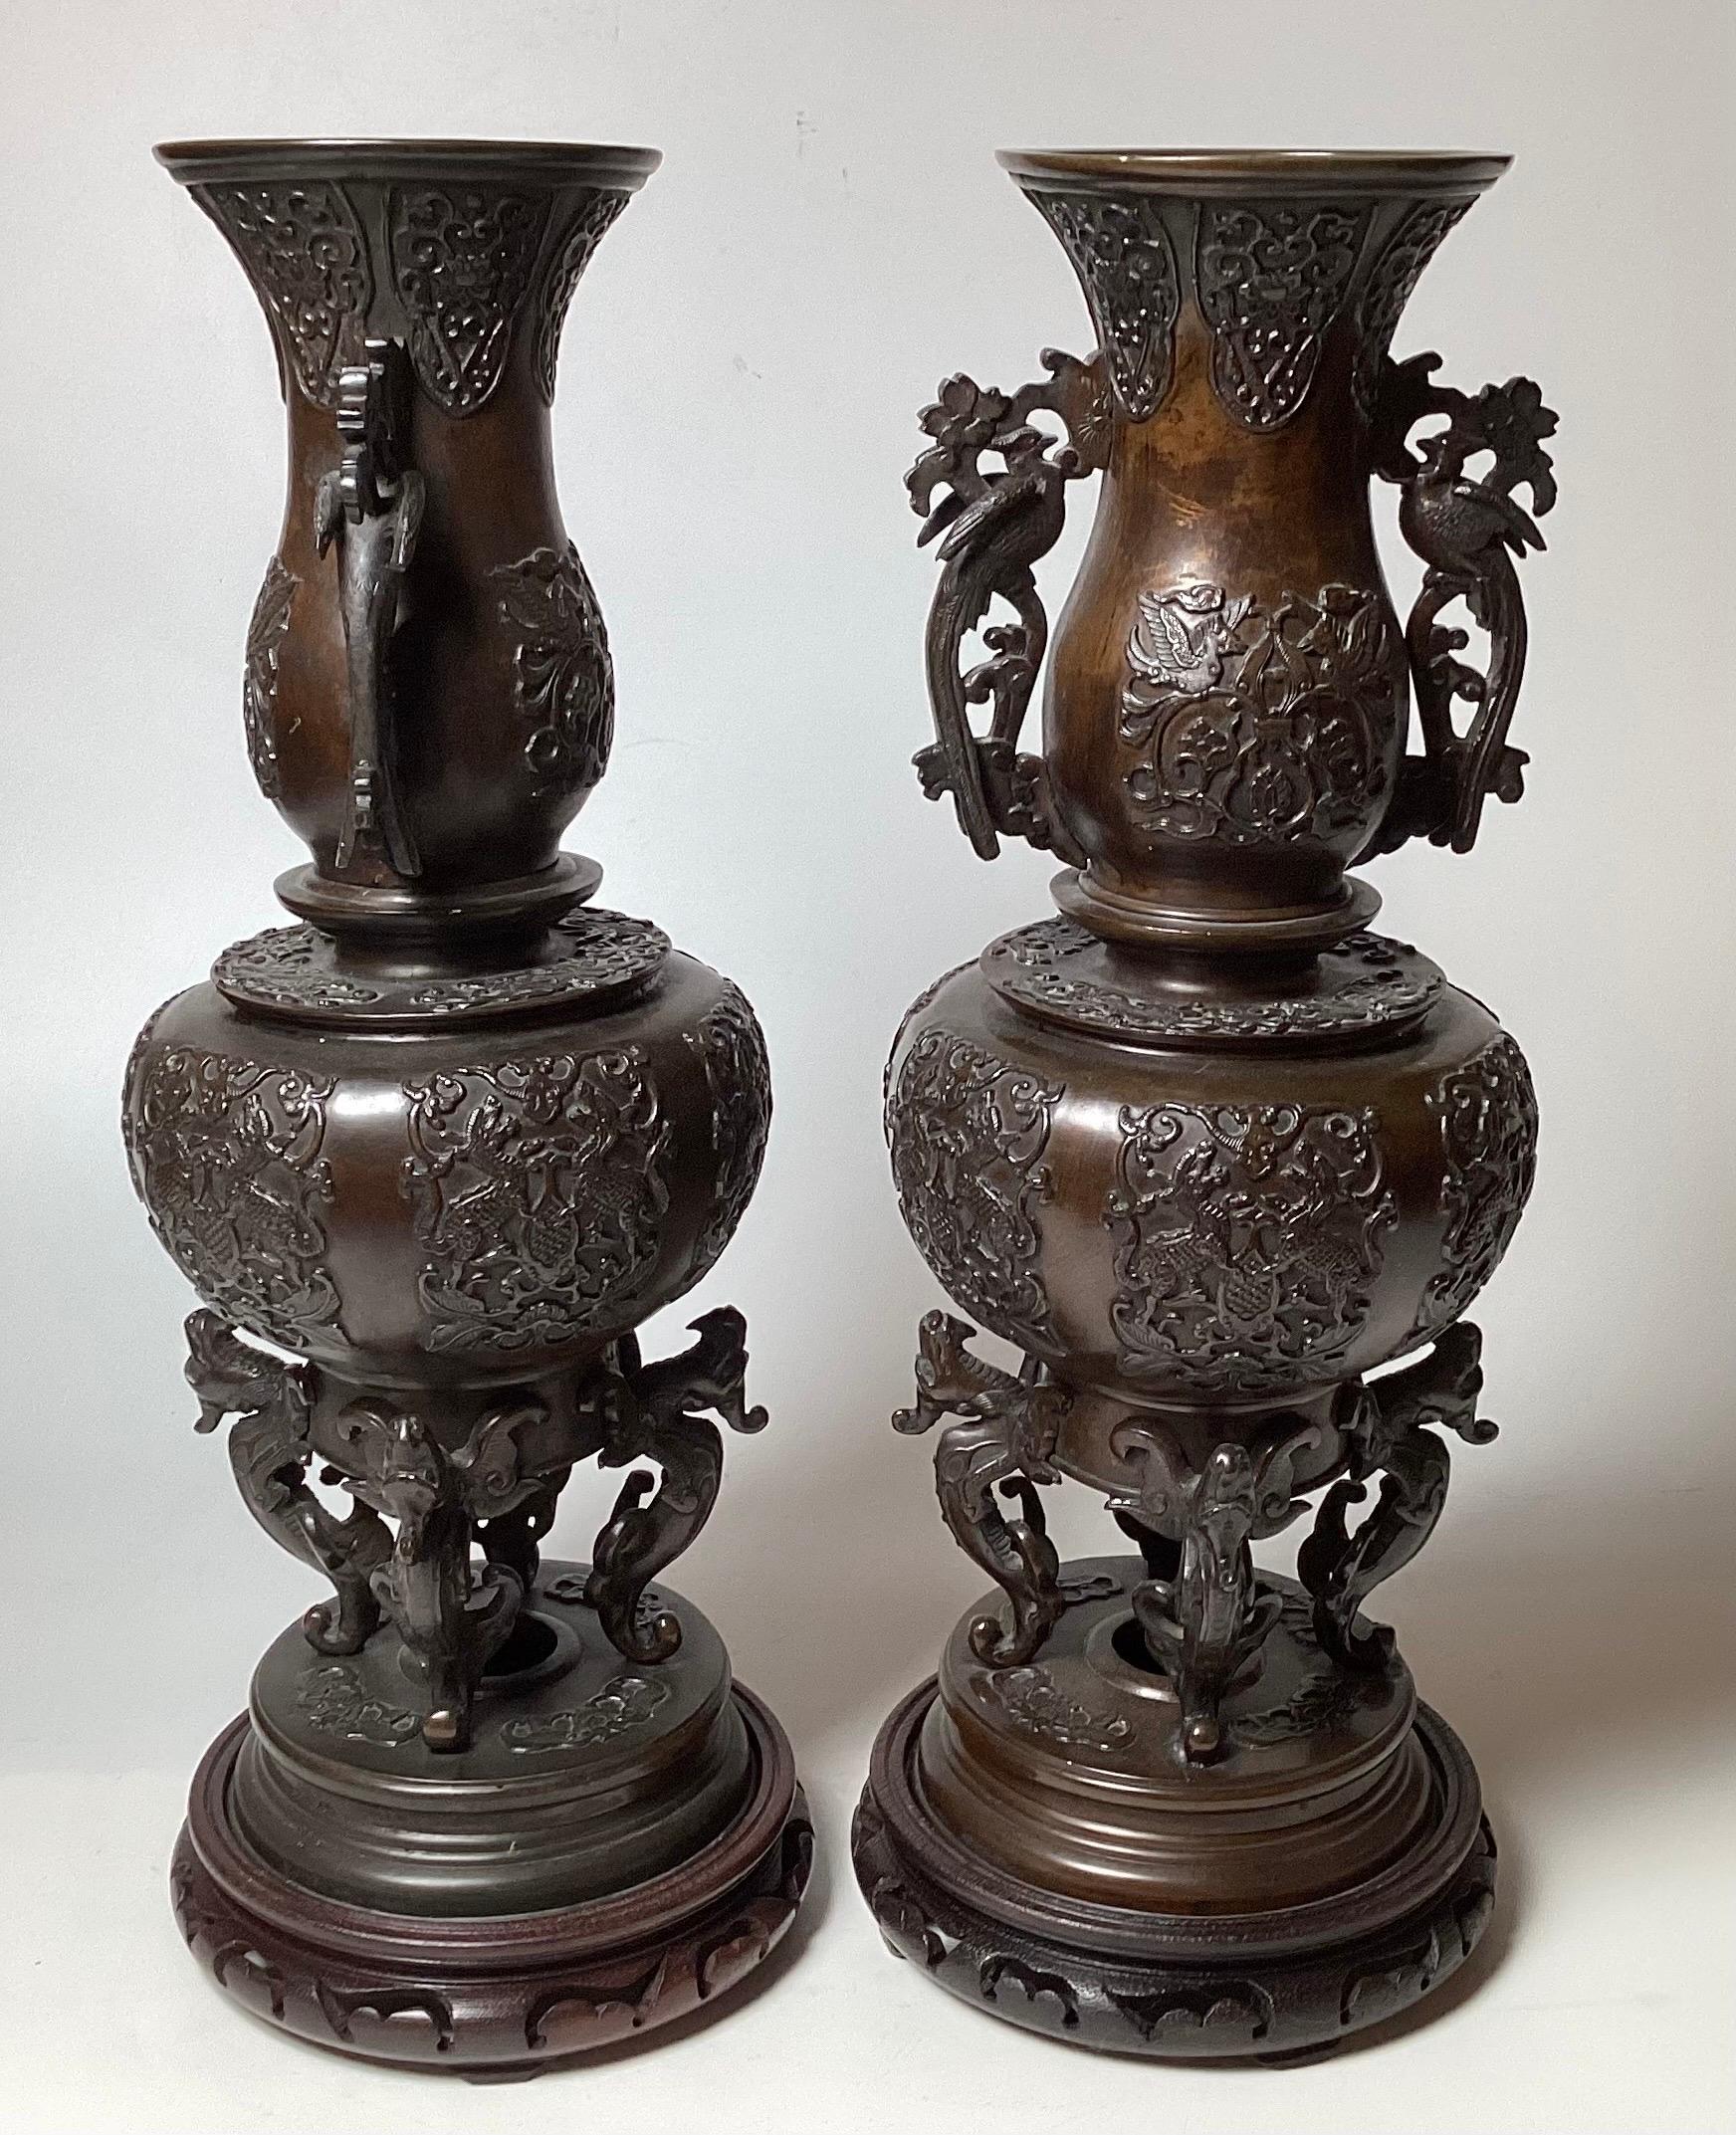 A Pair of patinated bronze figurative tall Meiji Period garniture vases, the original bark brown patination with very detailed surface and handles.  19 inches tall 